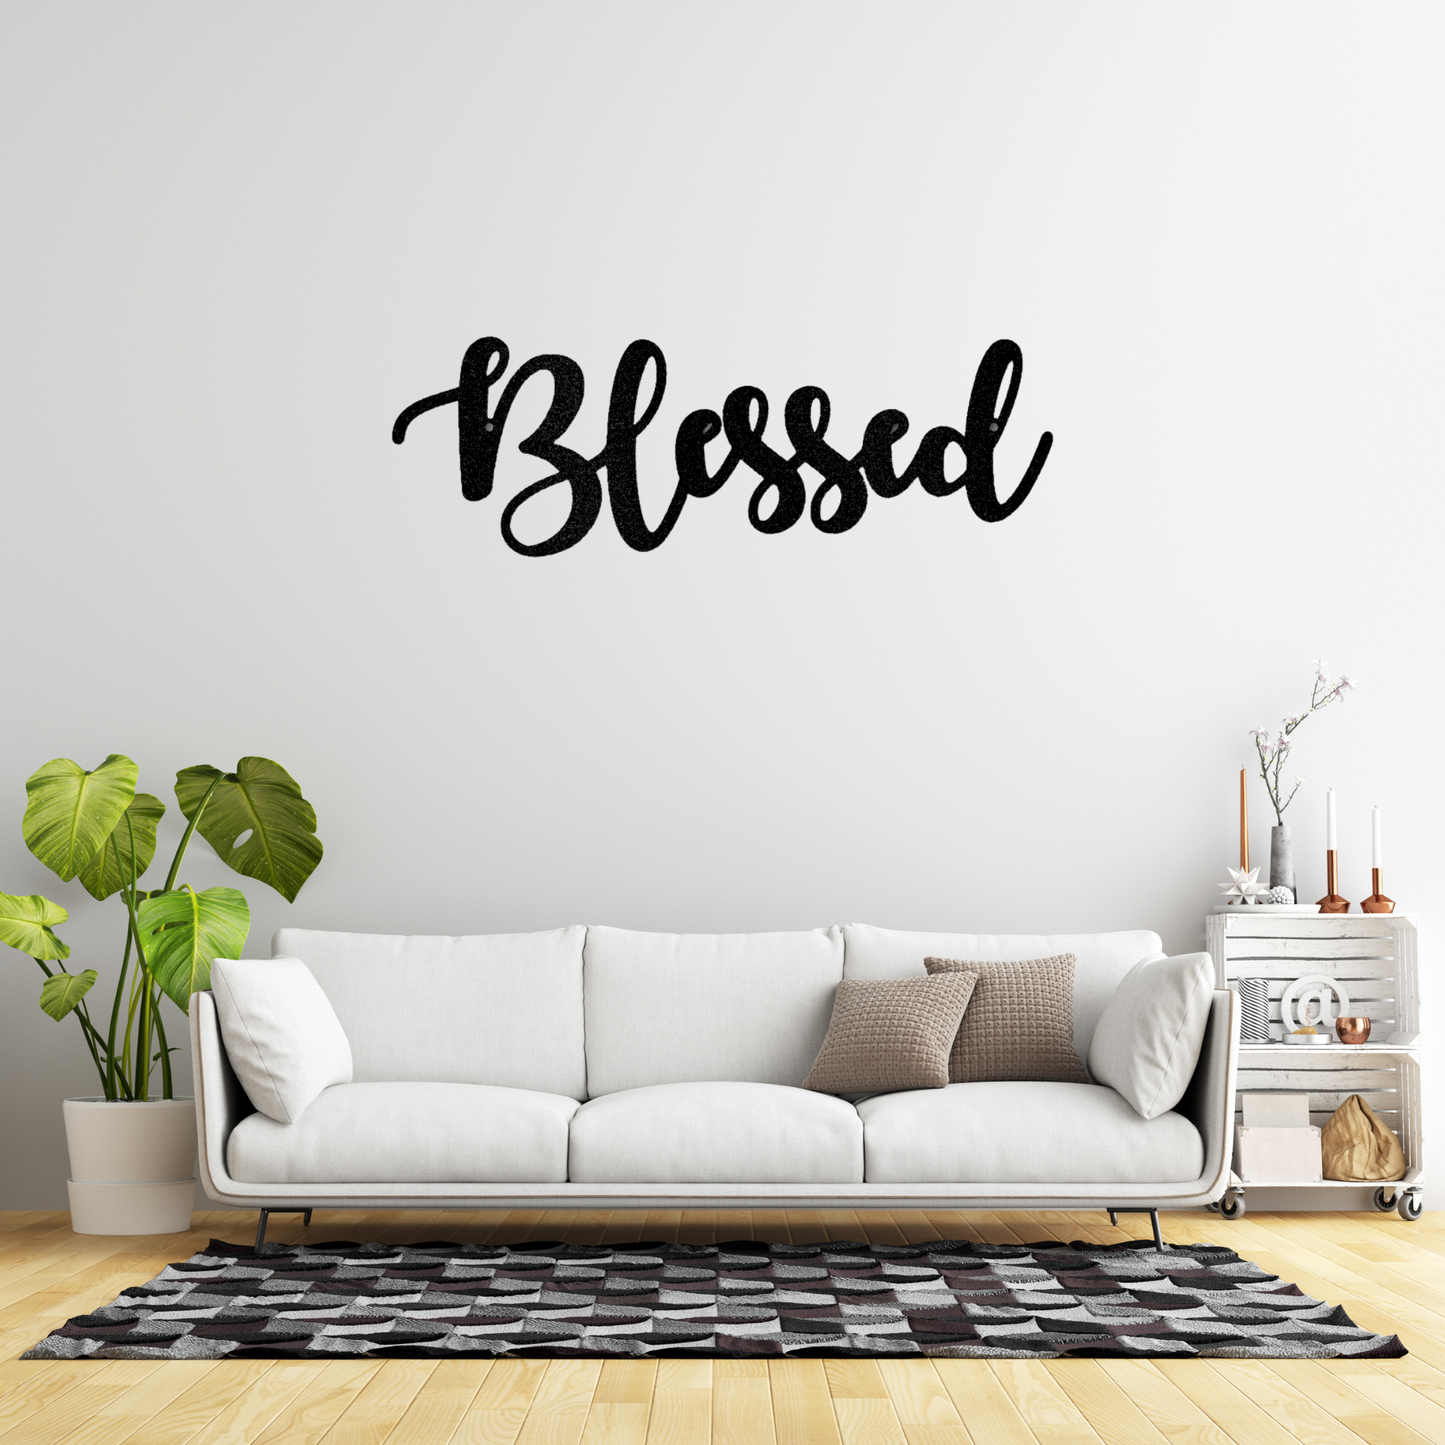 Blessed Script - Steel Sign, House Decor, Wall Art, Metal Signs, Metal Decorative Sign, Indoor Sign, Metal Monogram, Dining Room Wall Decor